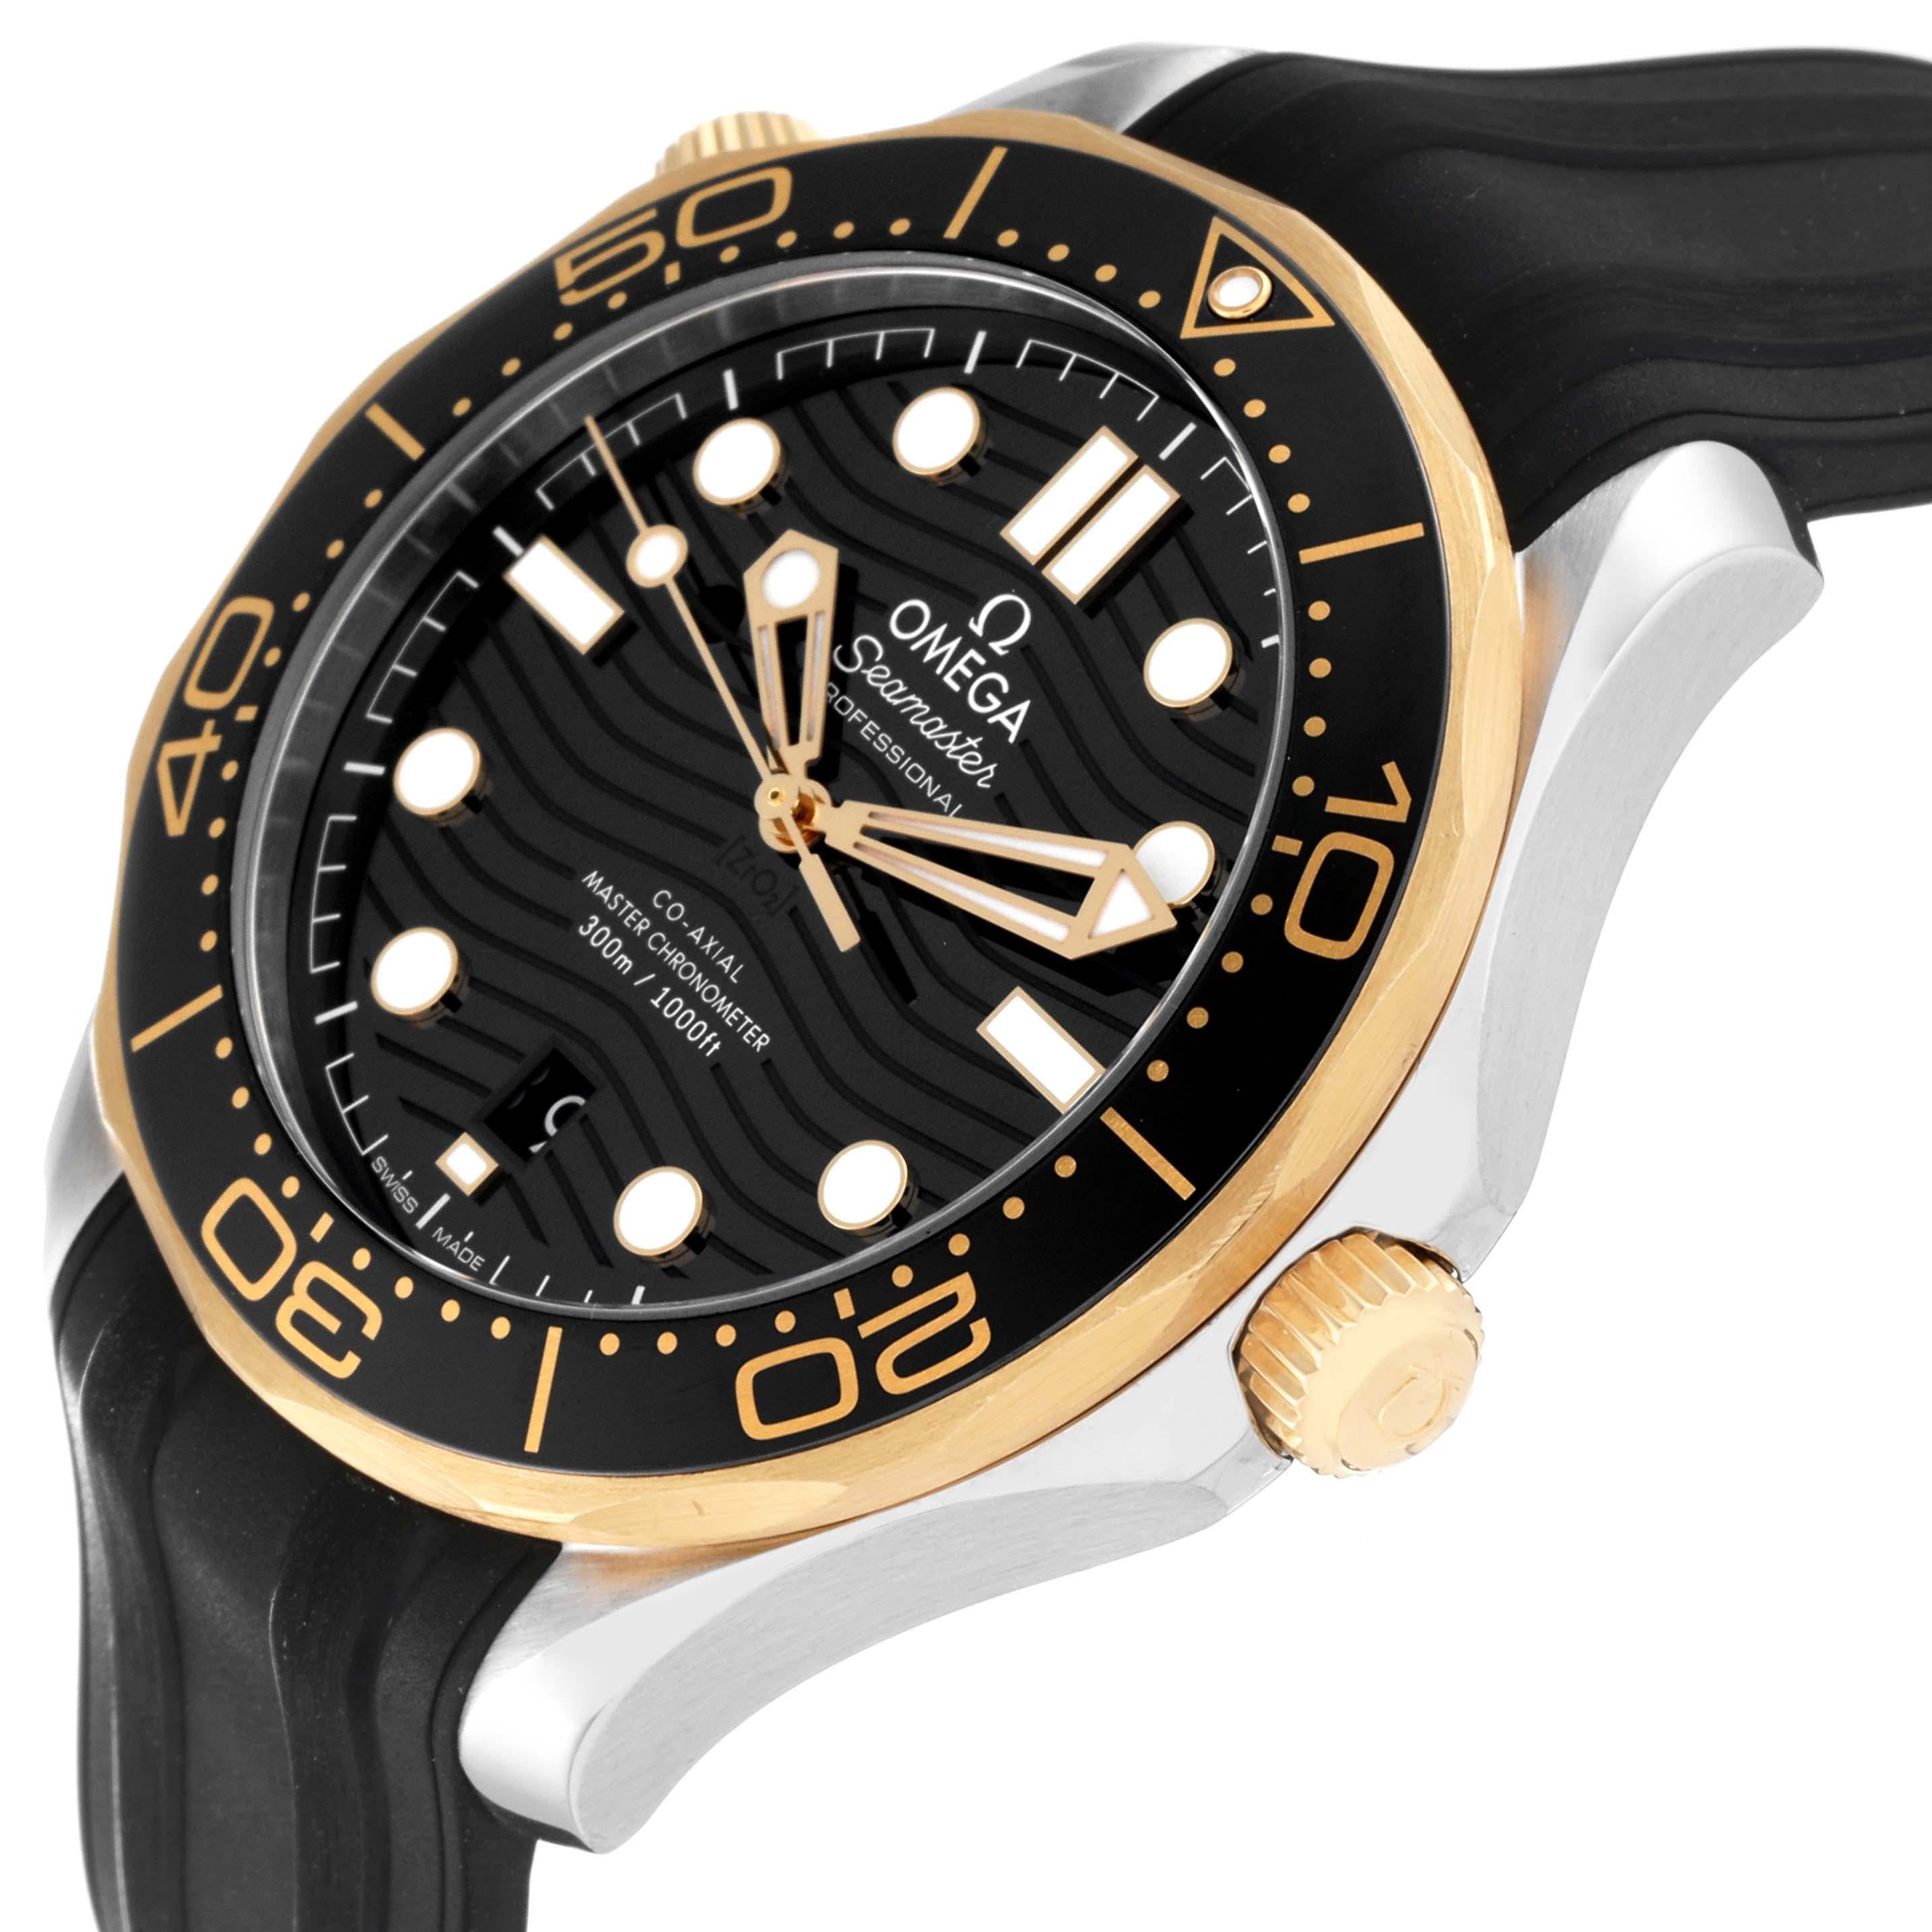 Omega Seamaster 300M Steel Yellow Gold Mens Watch 210.22.42.20.01.001 Box Card For Sale 1